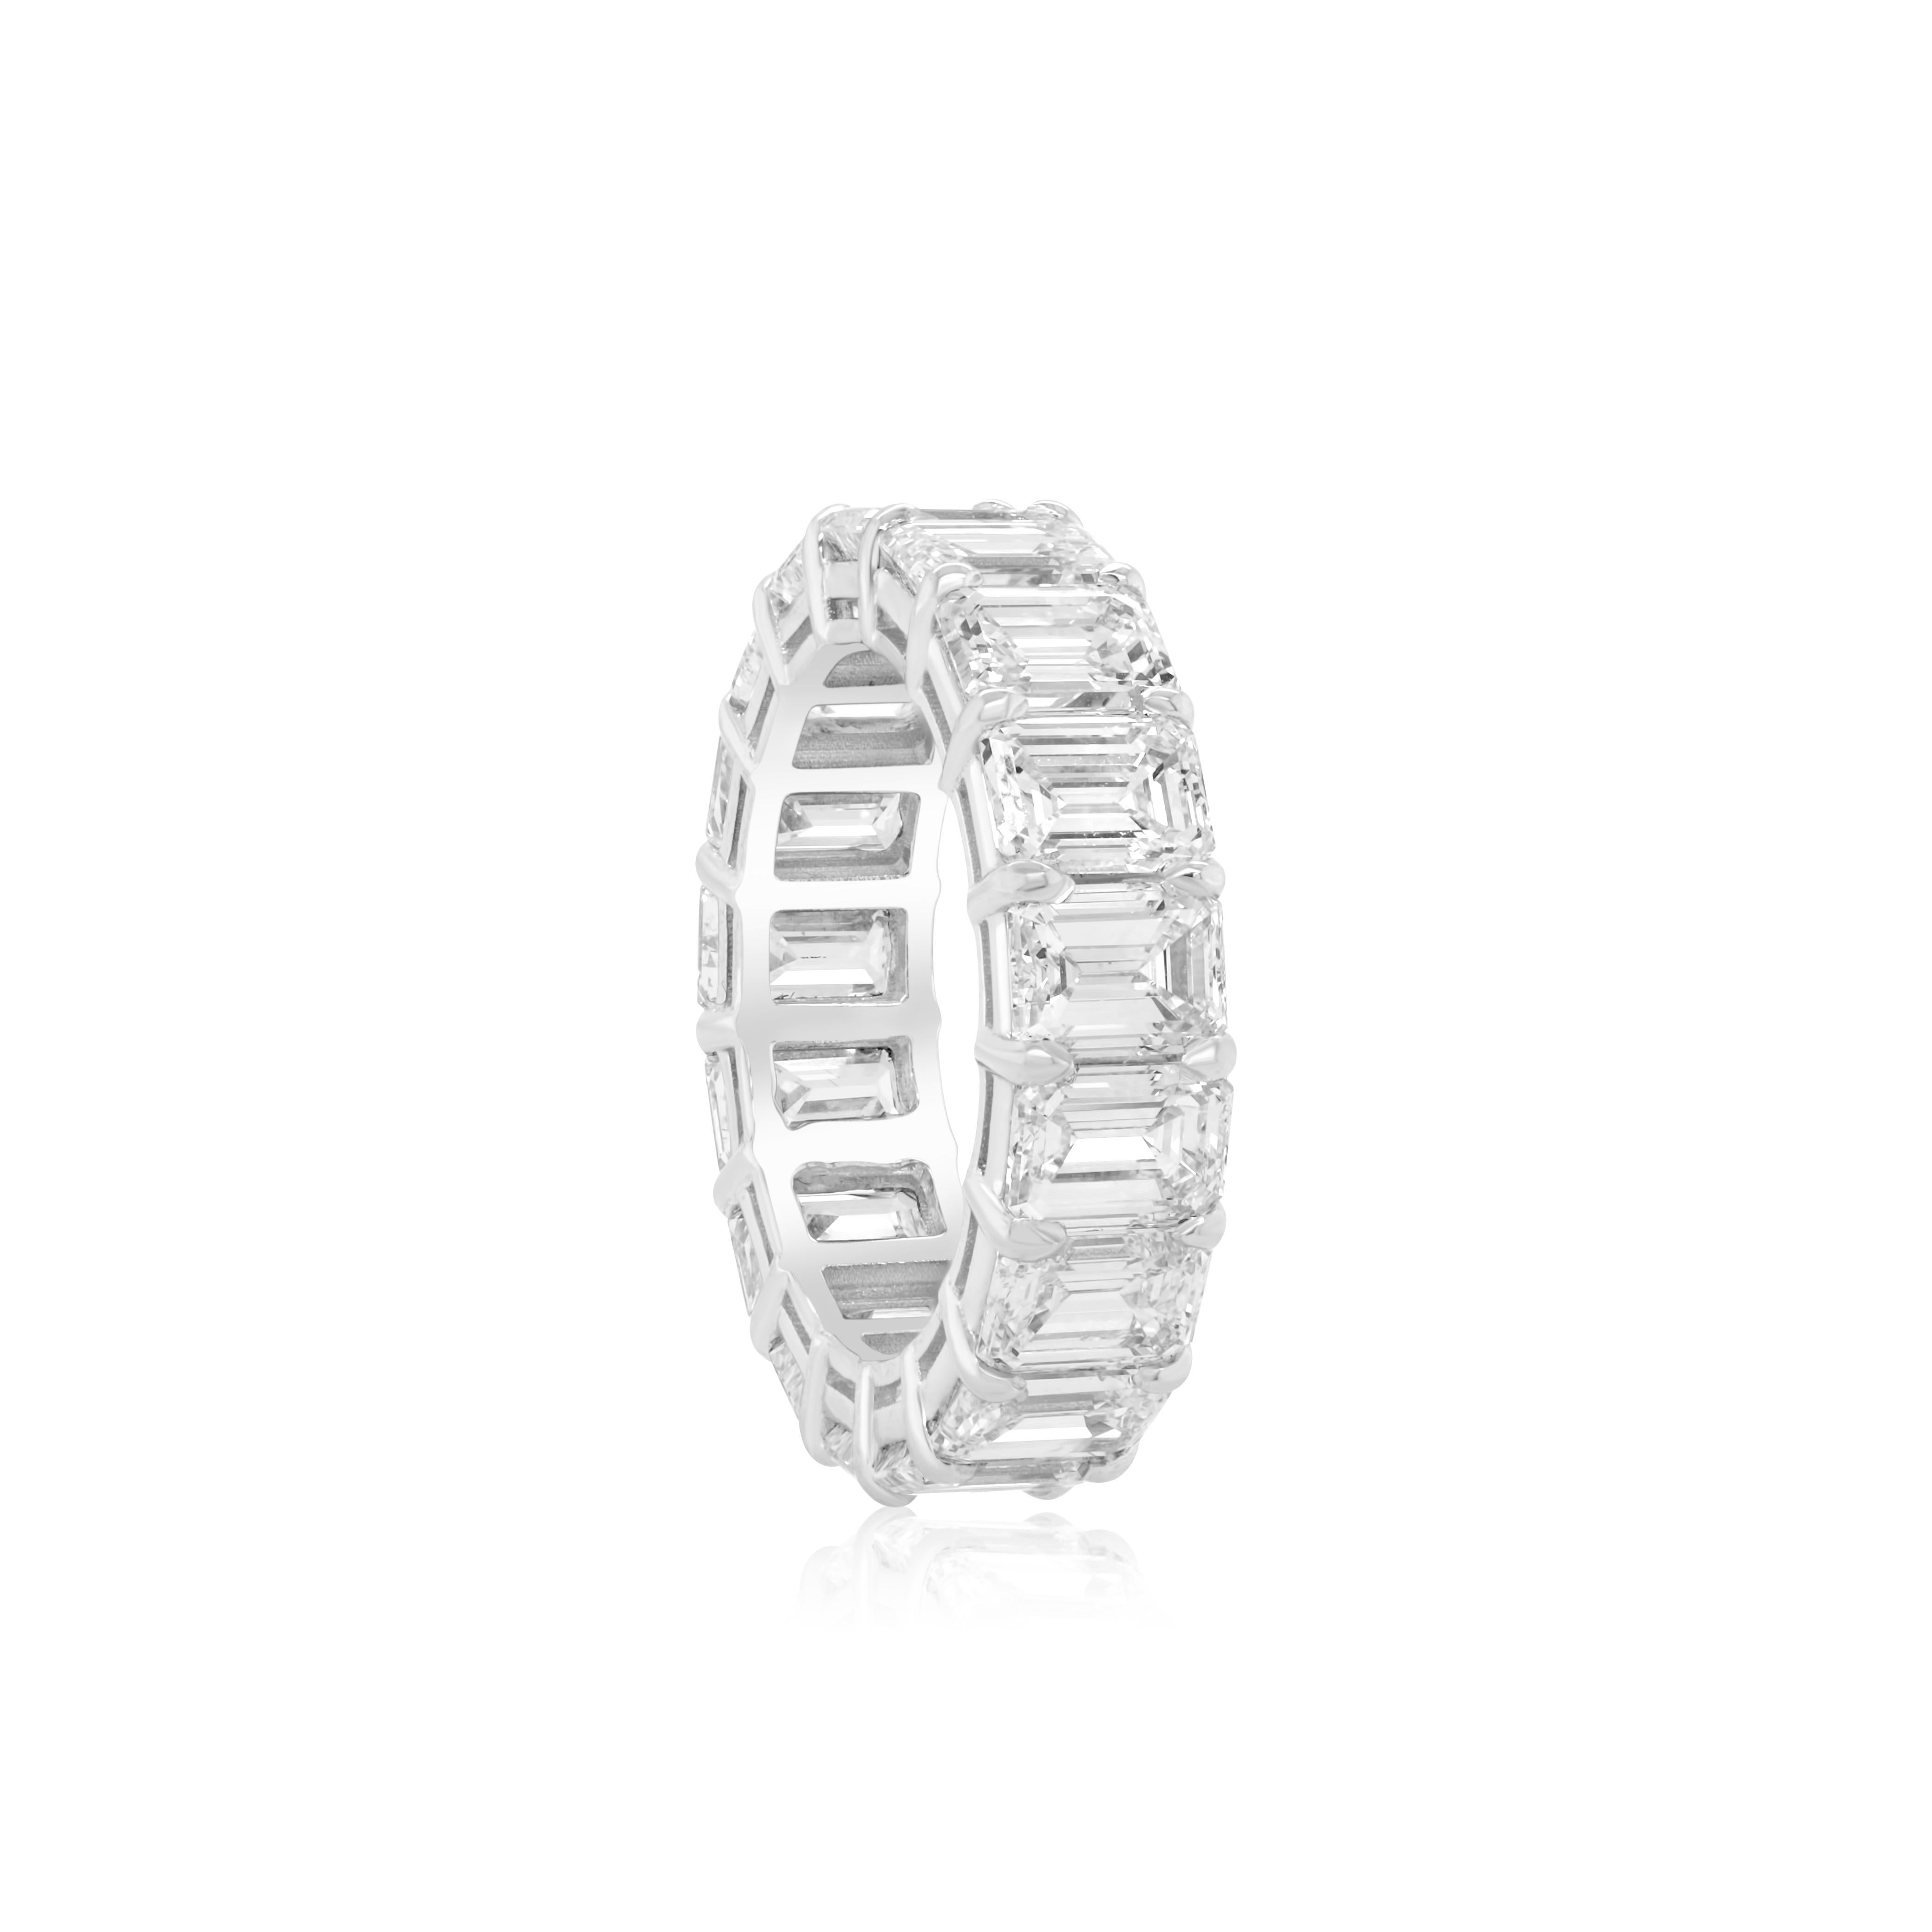 Modern Diana M. PLATINUM WITH 19 EMERALD CUT DIAMONDS  RING, WIEGHING 6.40CTS For Sale